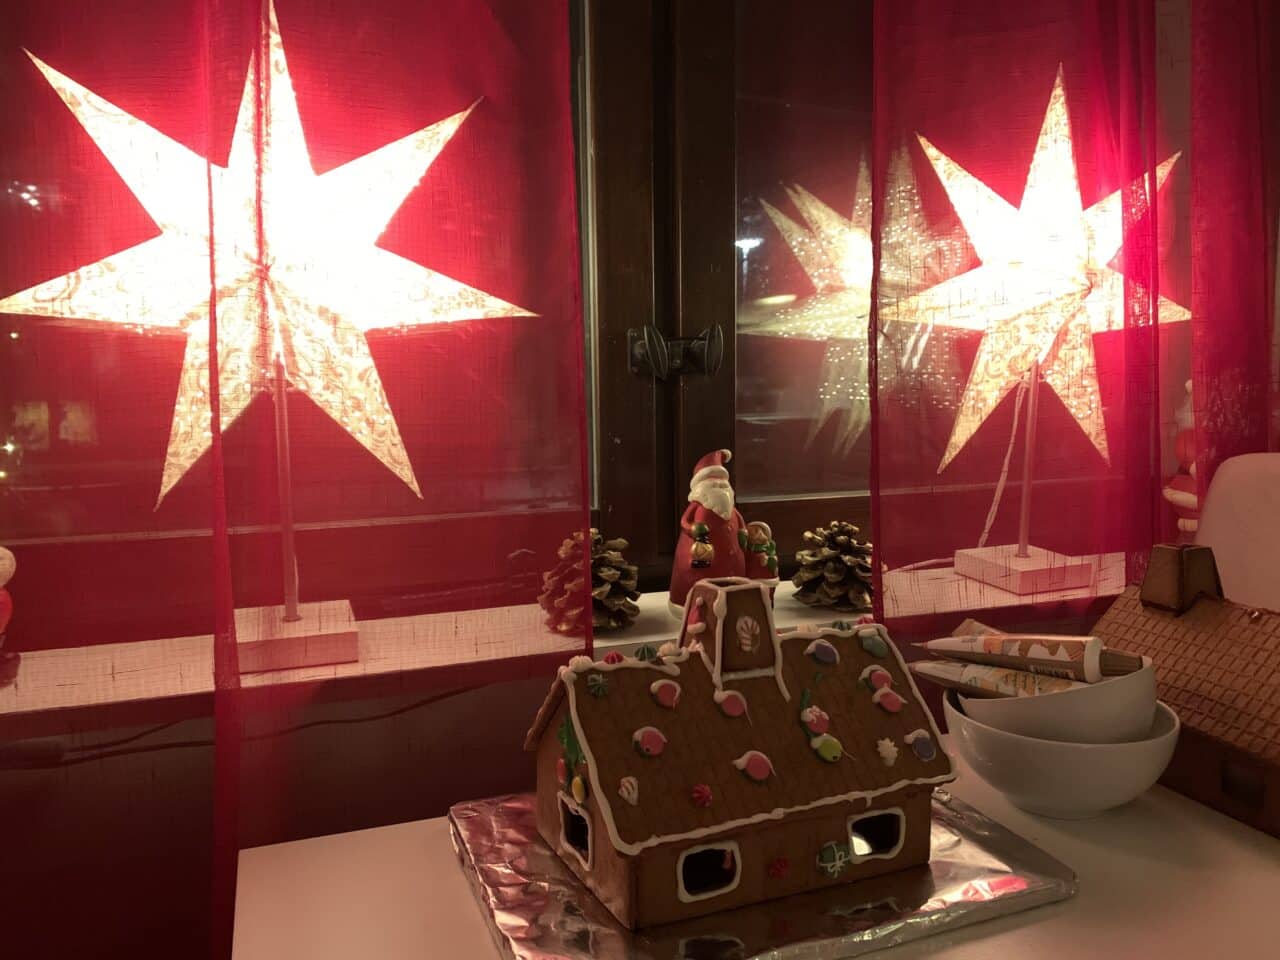 Window Christmas Decorations And A Gingerbread House